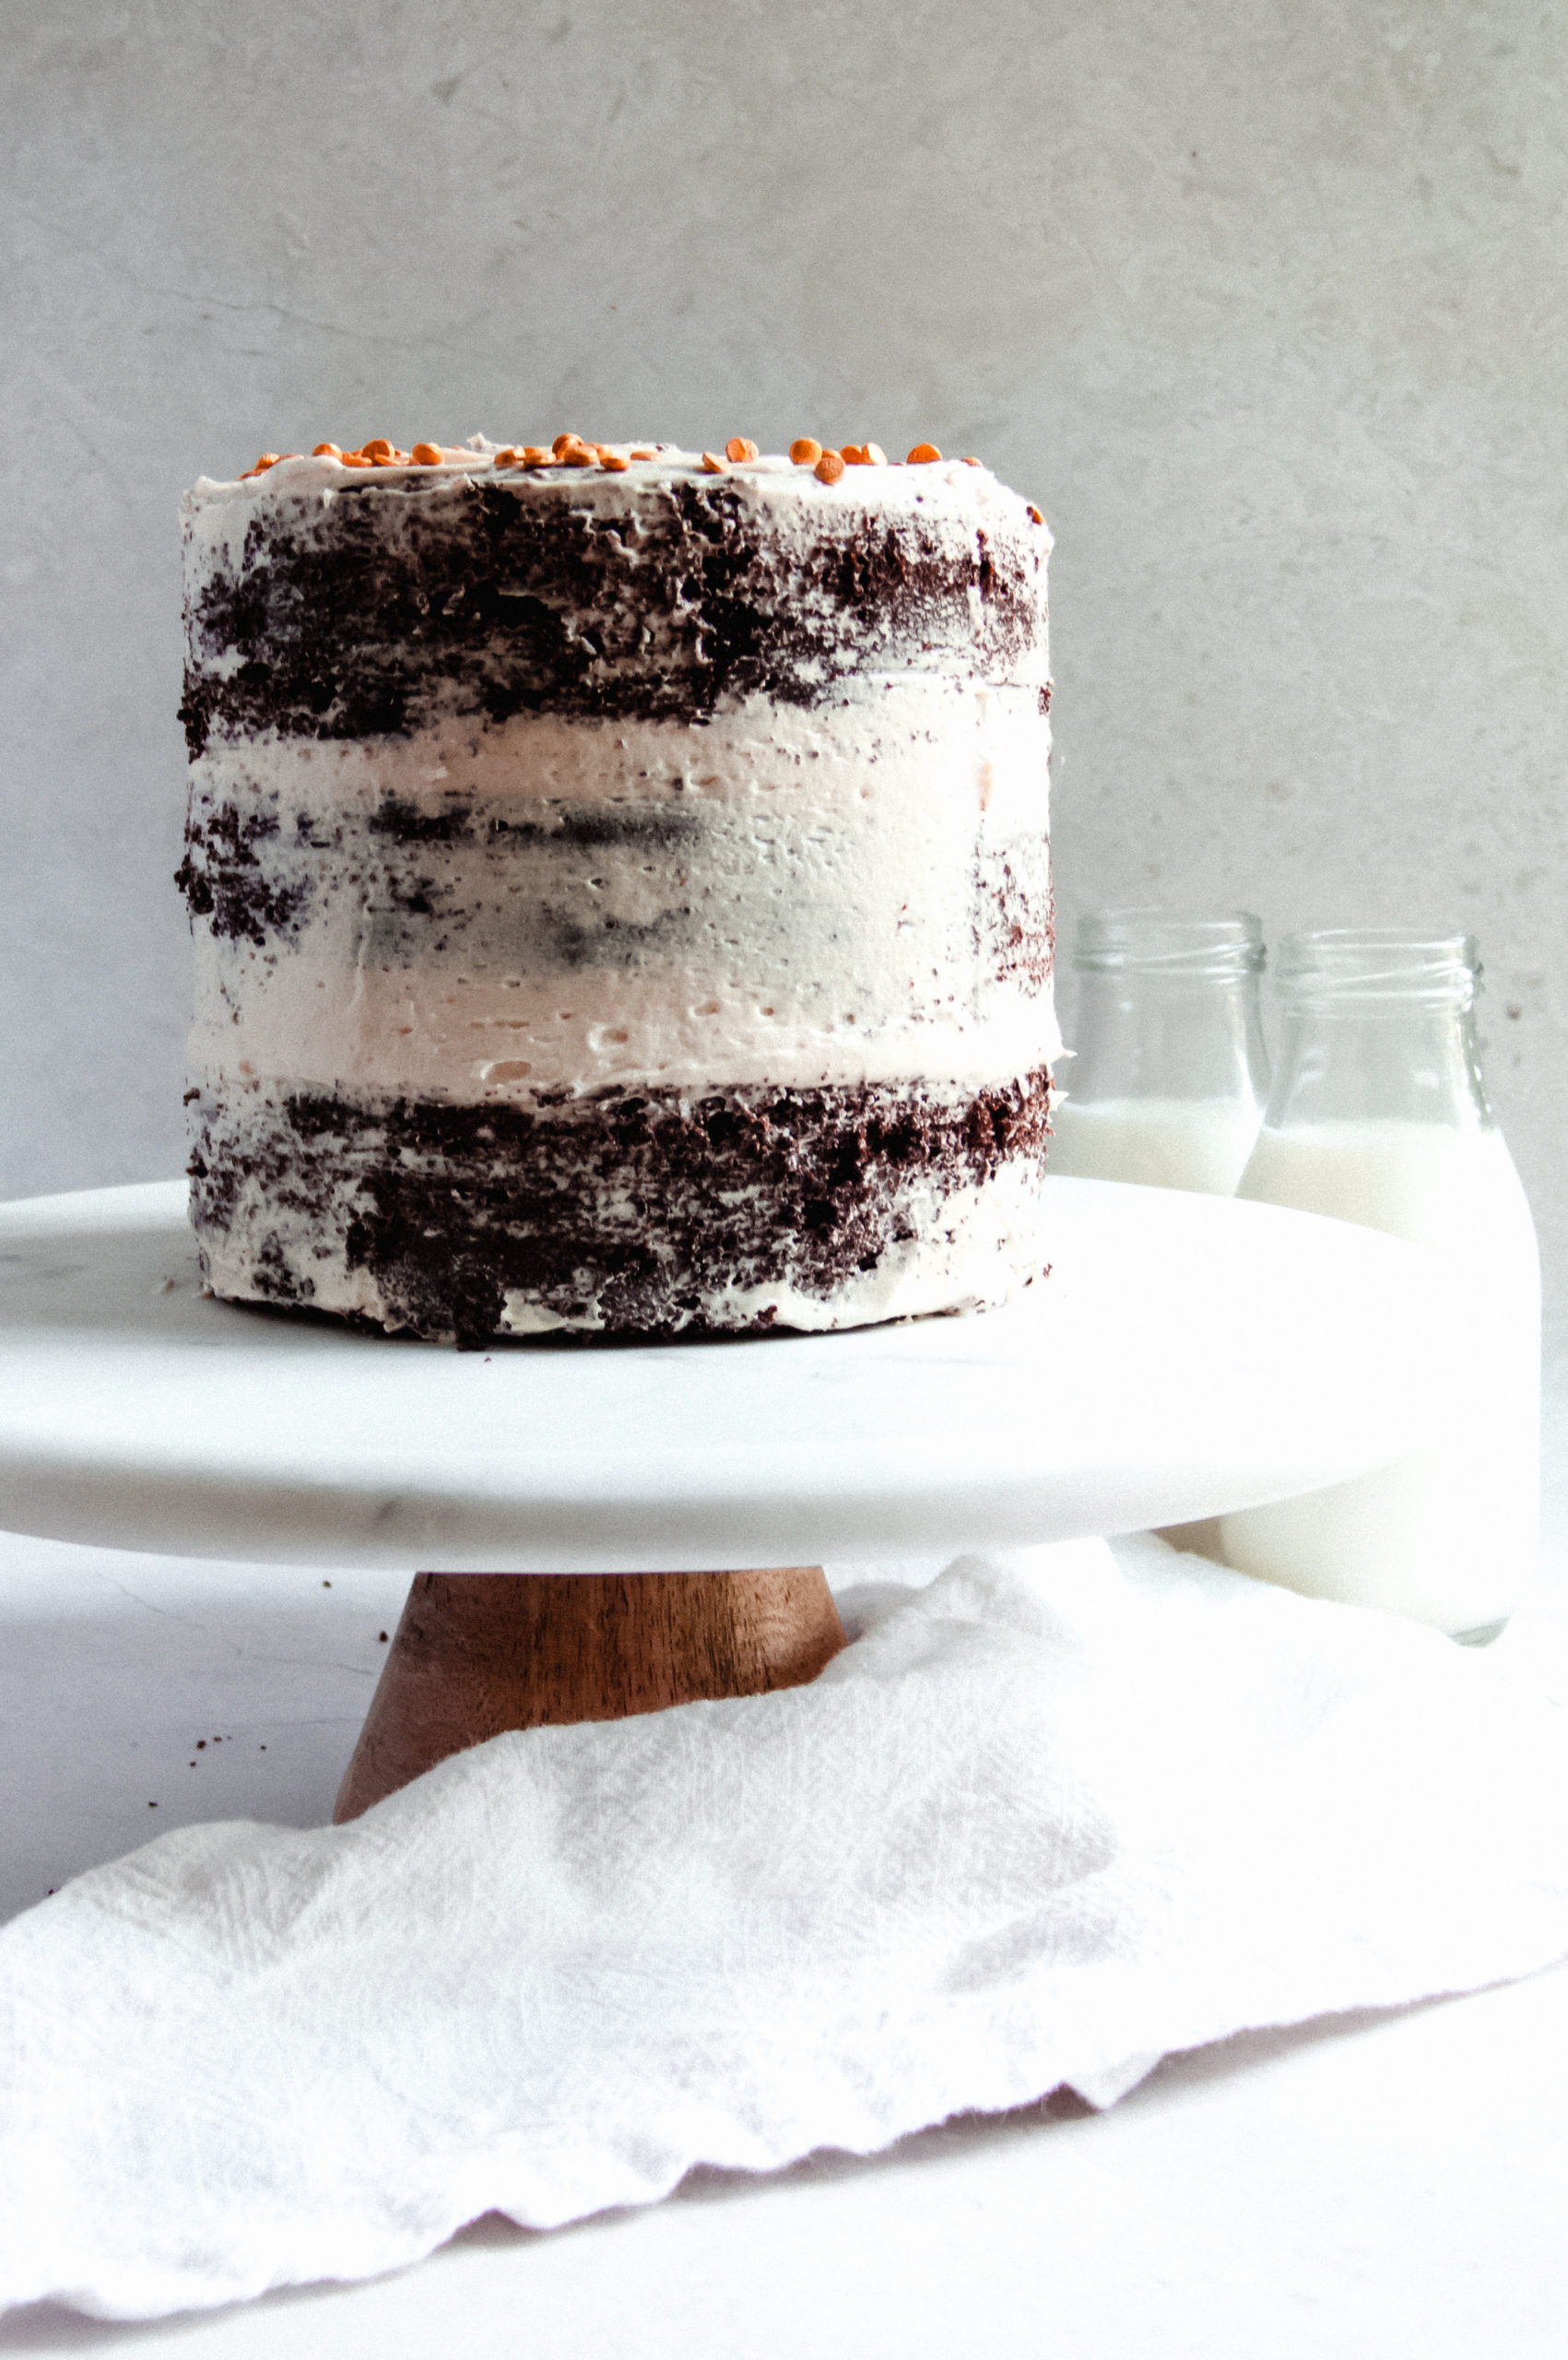 Grain-free Chocolate Cake with Mocha Buttercream - A Calculated Whisk